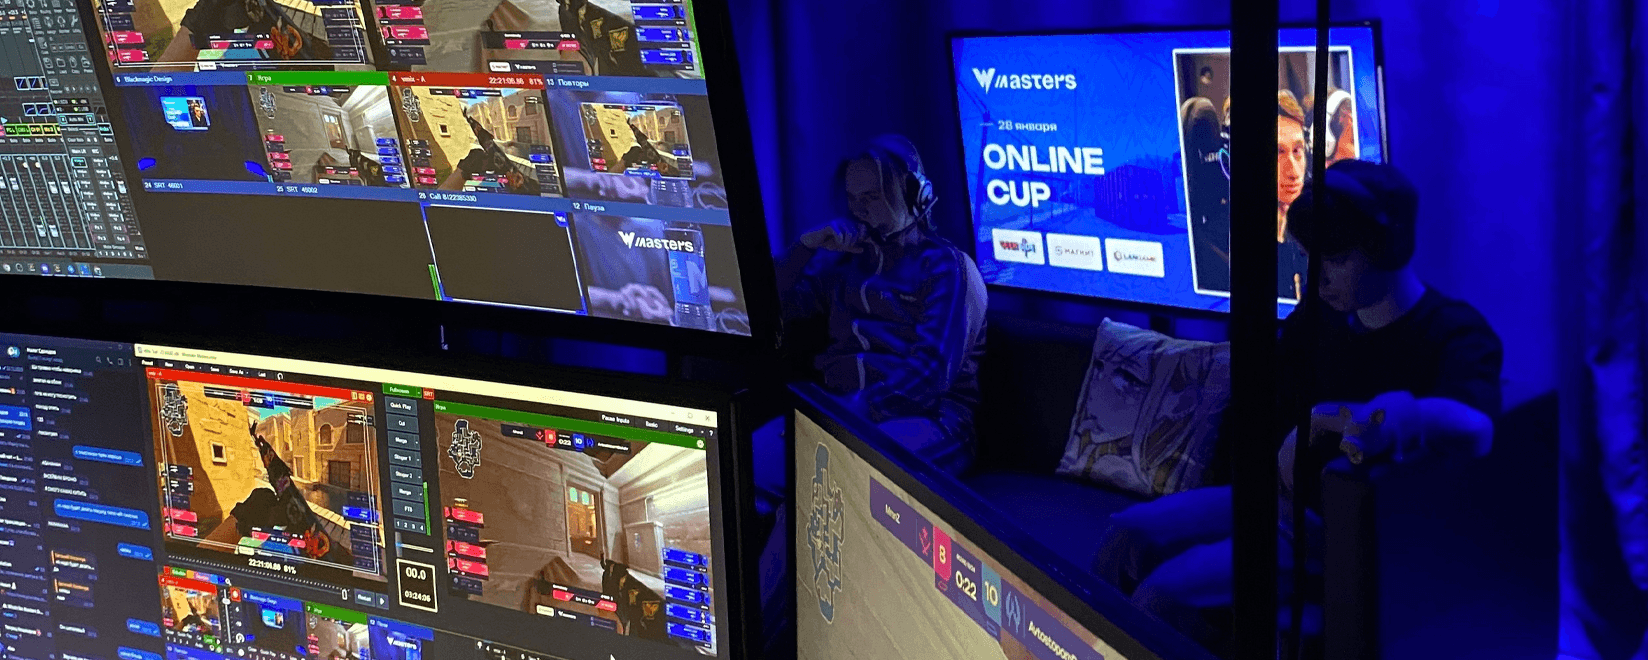 WMasters: итоги Online Cup